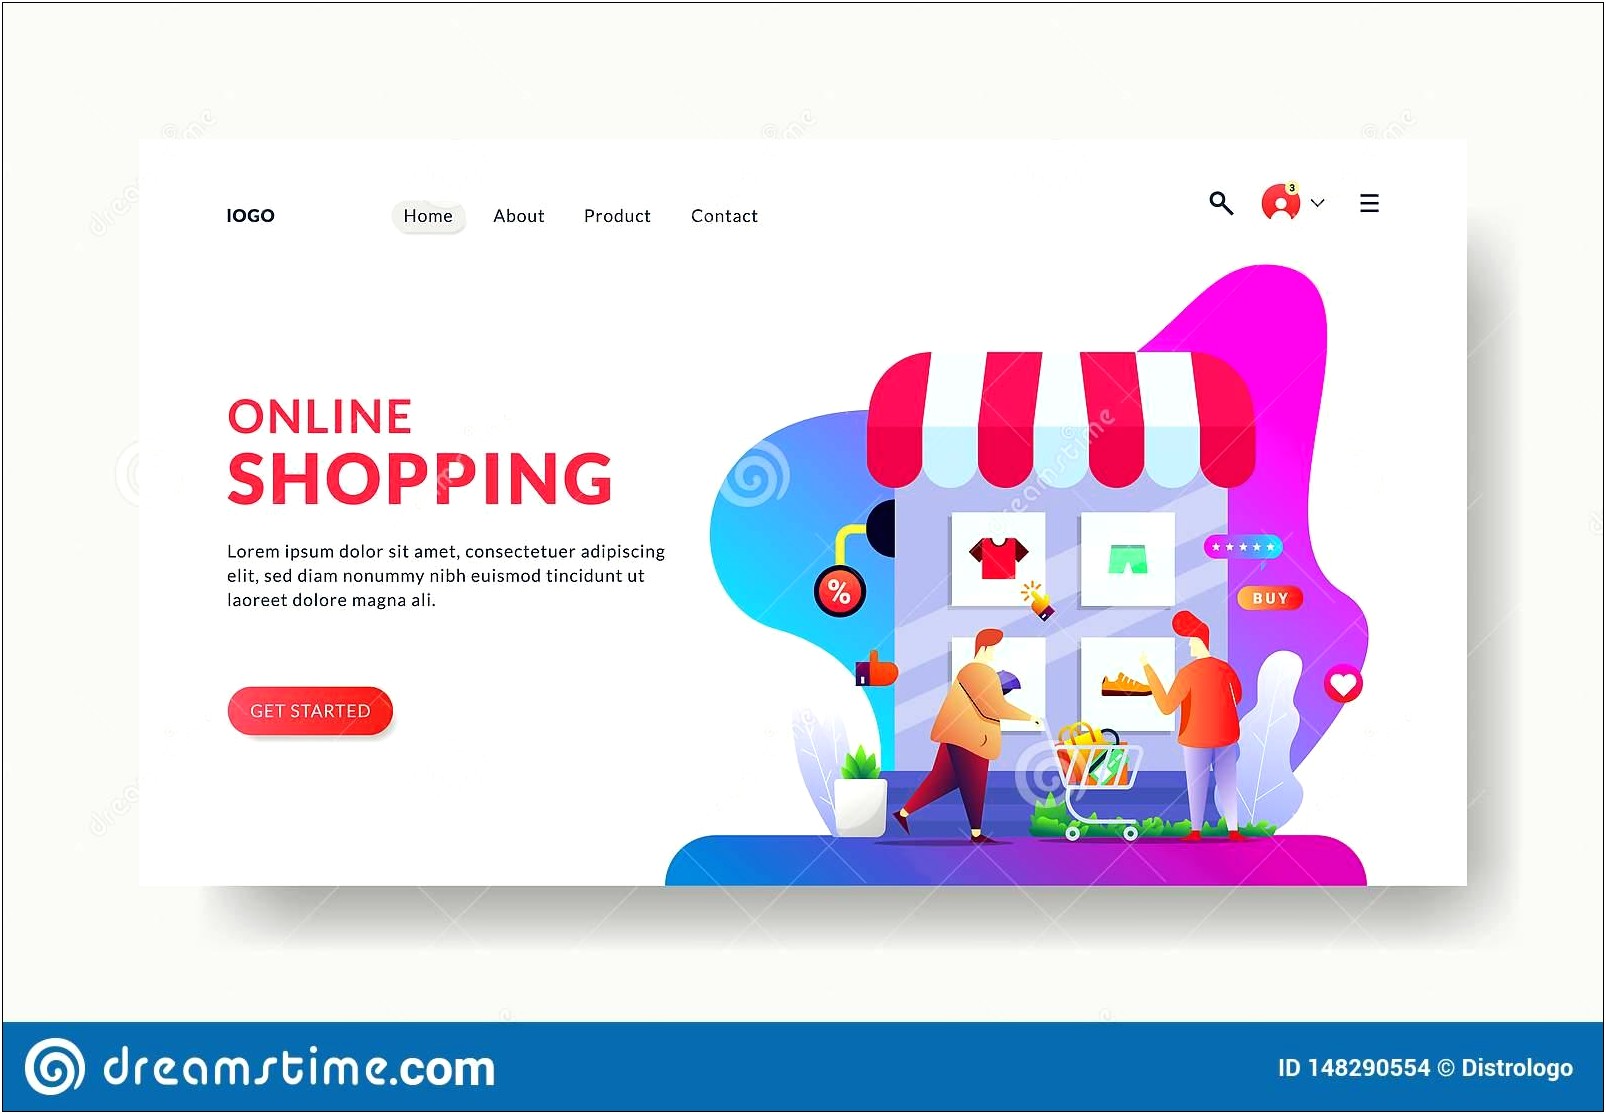 Download Free Online Shopping Web Template